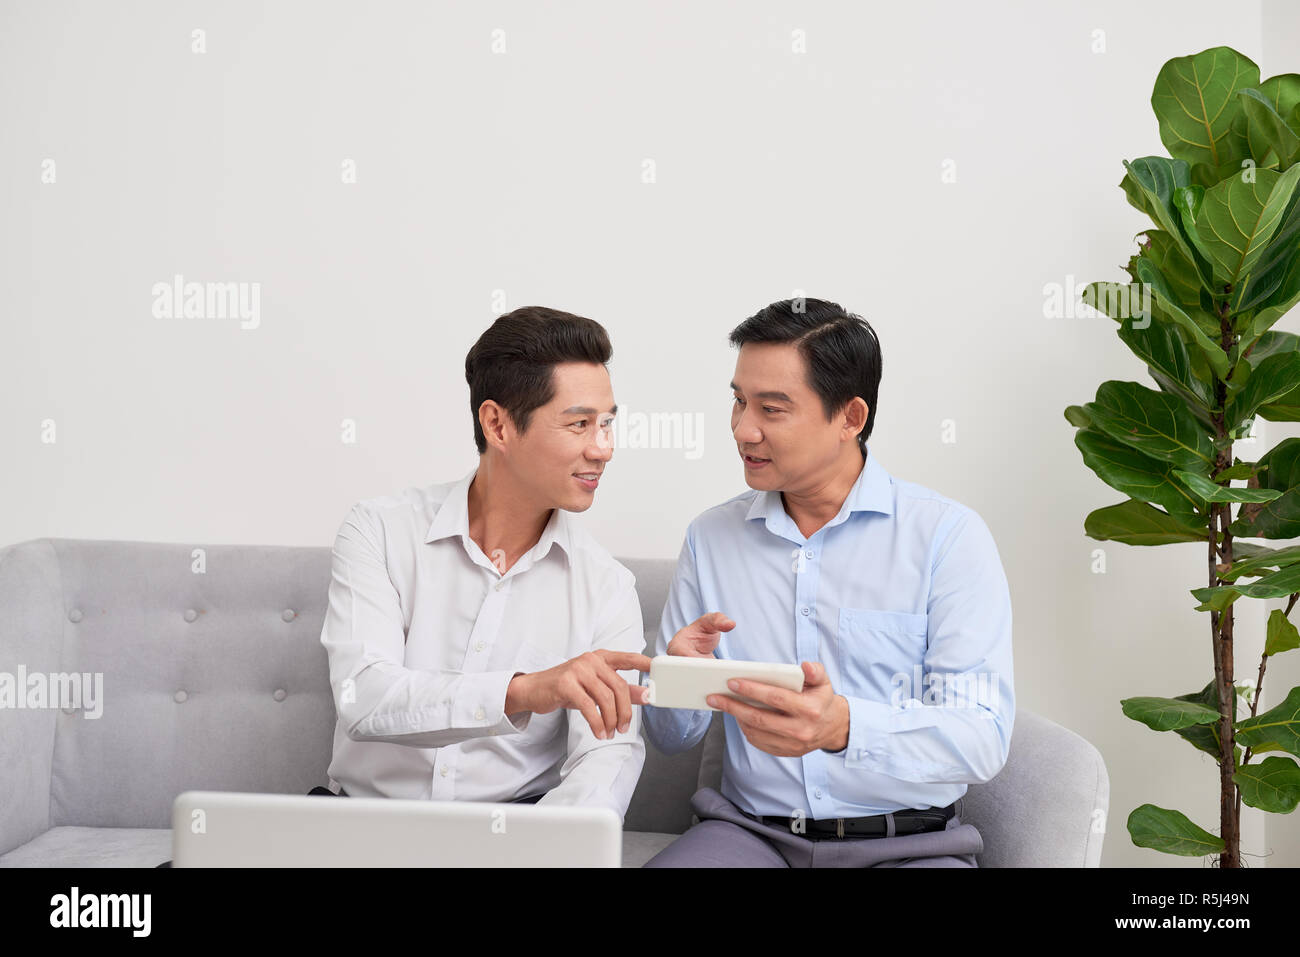 Good mood. Two businessman sitting in front of laptop talking about their plans. Stock Photo